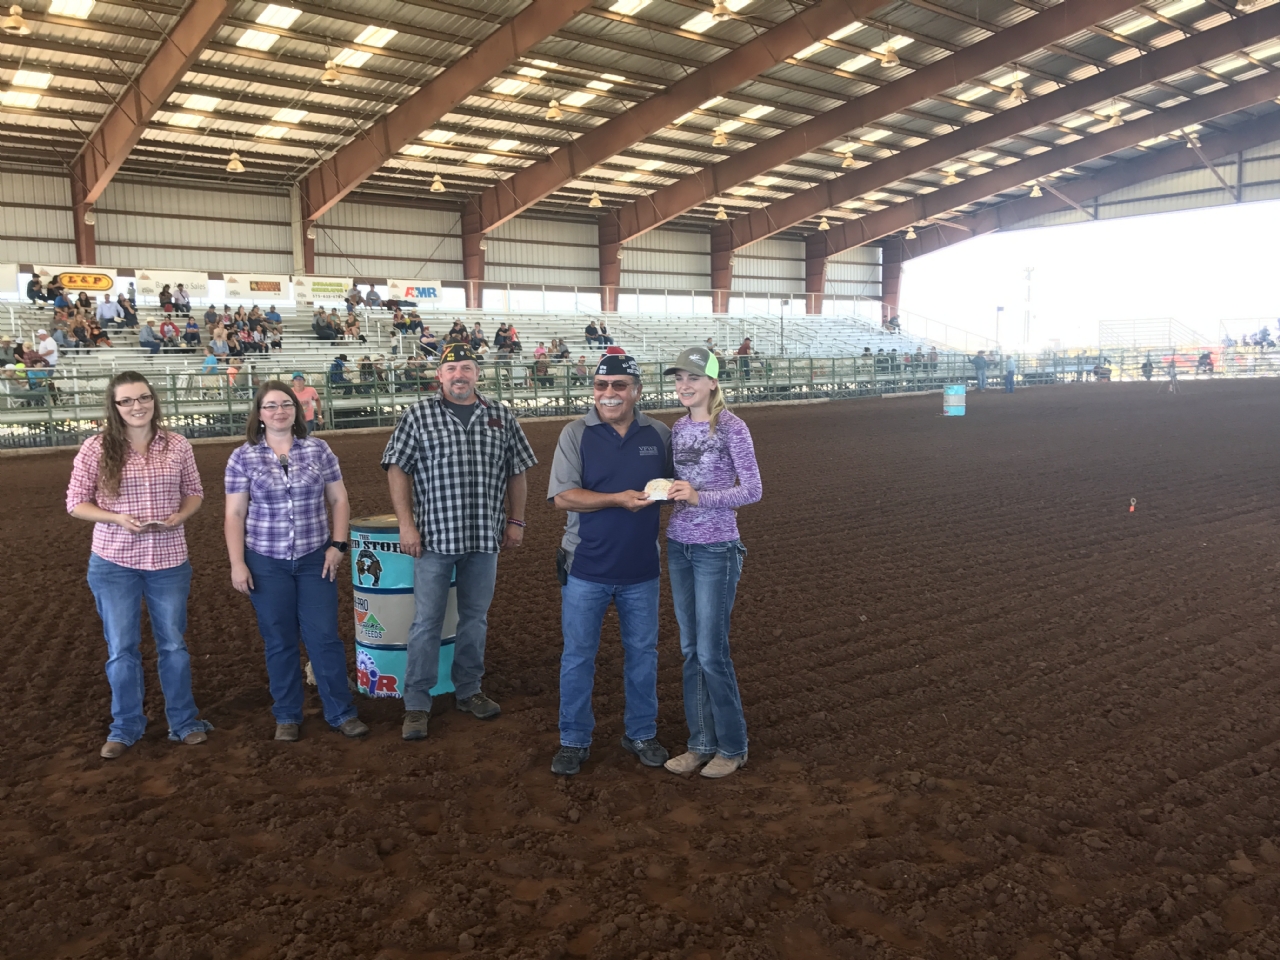 On 1 Oct 2017 VFW Post 6917 sponsored the Southern New Mexico State Fair Youth Barrel Race. Presenting the buckles to these young and talented cowgirls was Raul Sanchez and Rob Easley, This young lady won BOTH the 1D and 3D buckles.